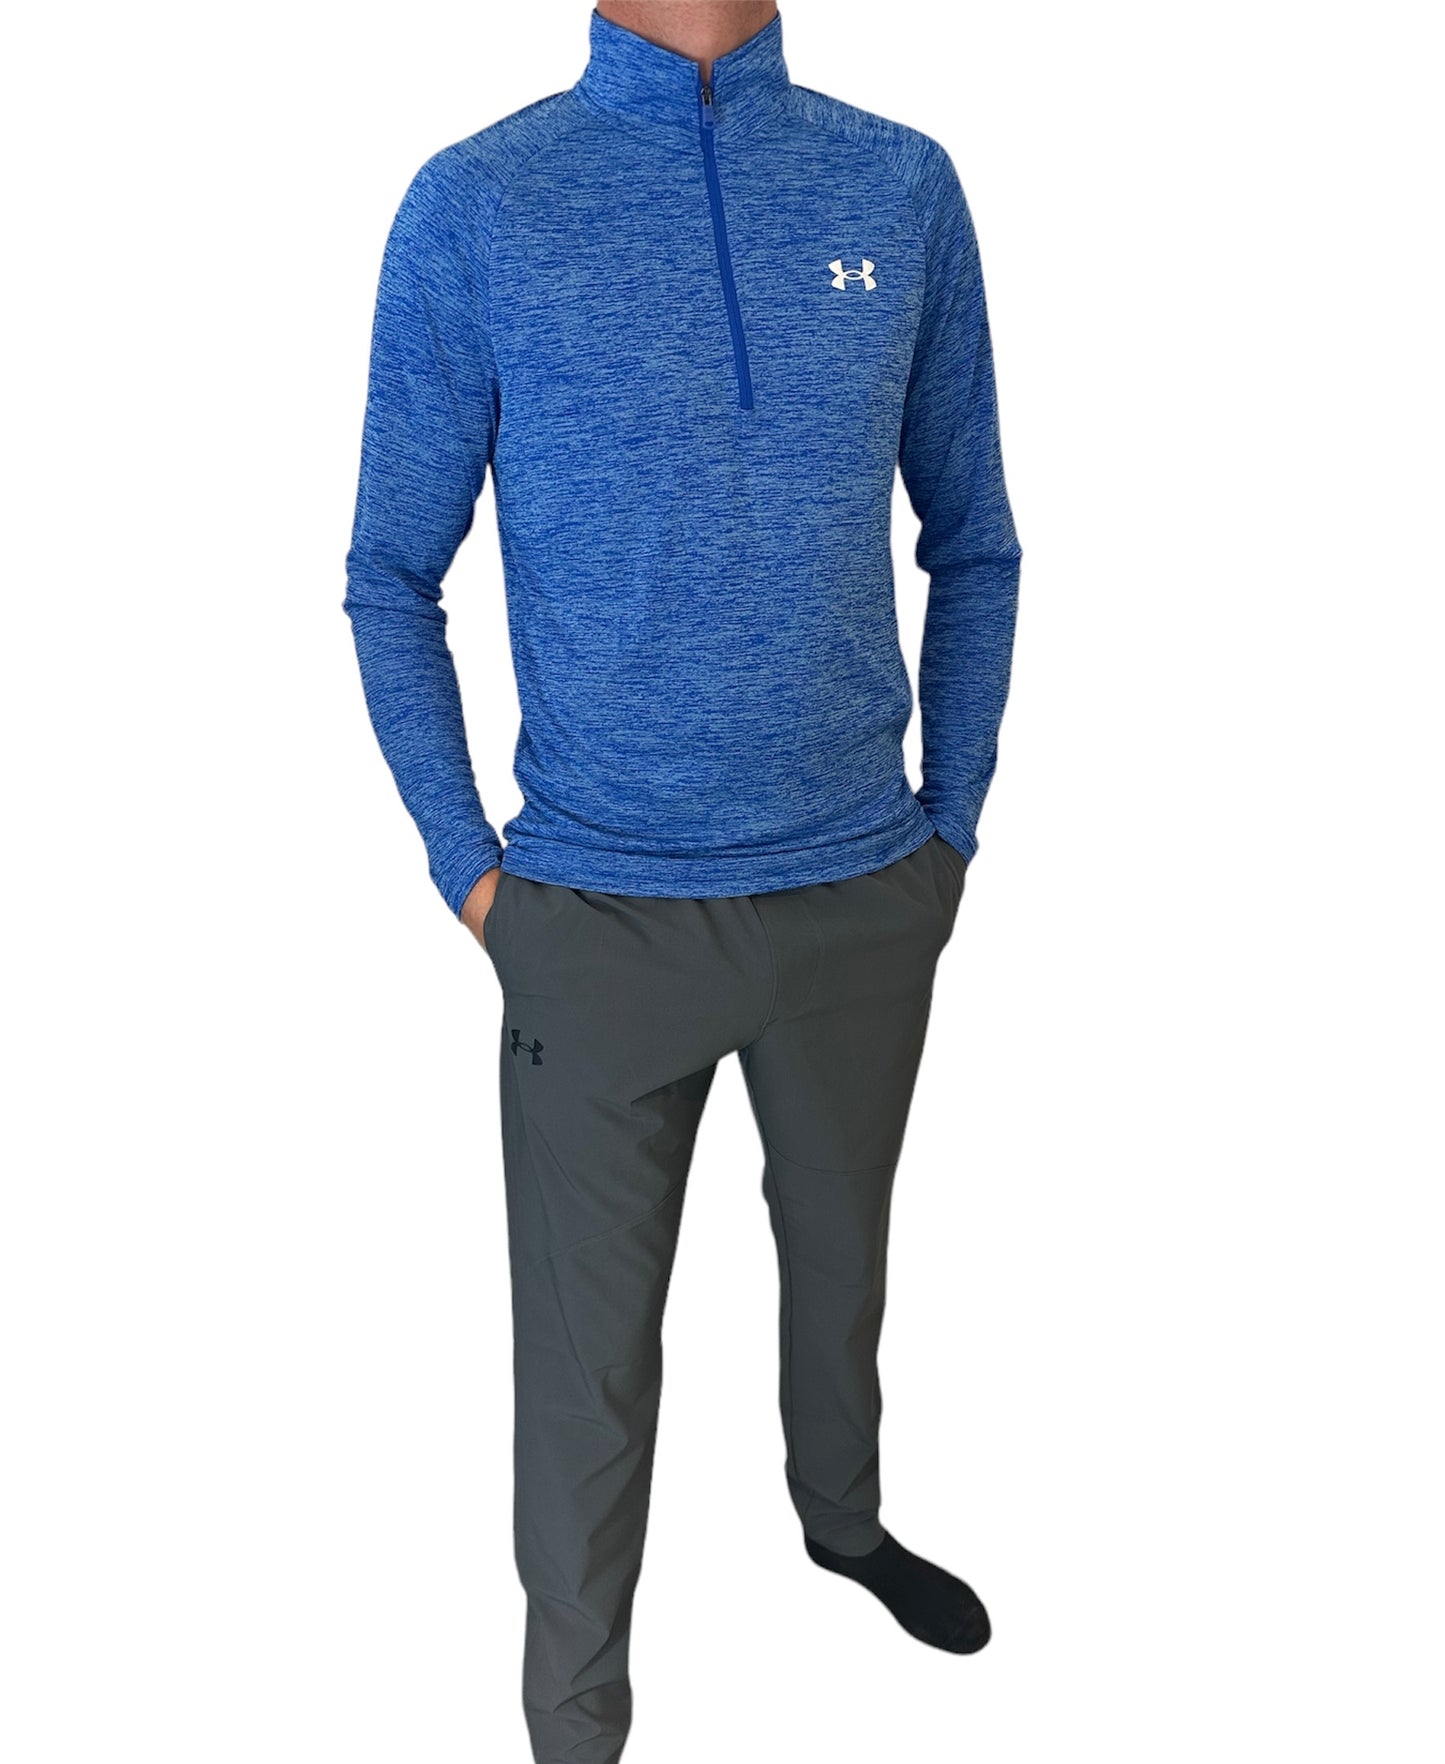 UNDER ARMOUR TECH FULL TRACKSUIT - ROYAL BLUE / GREY